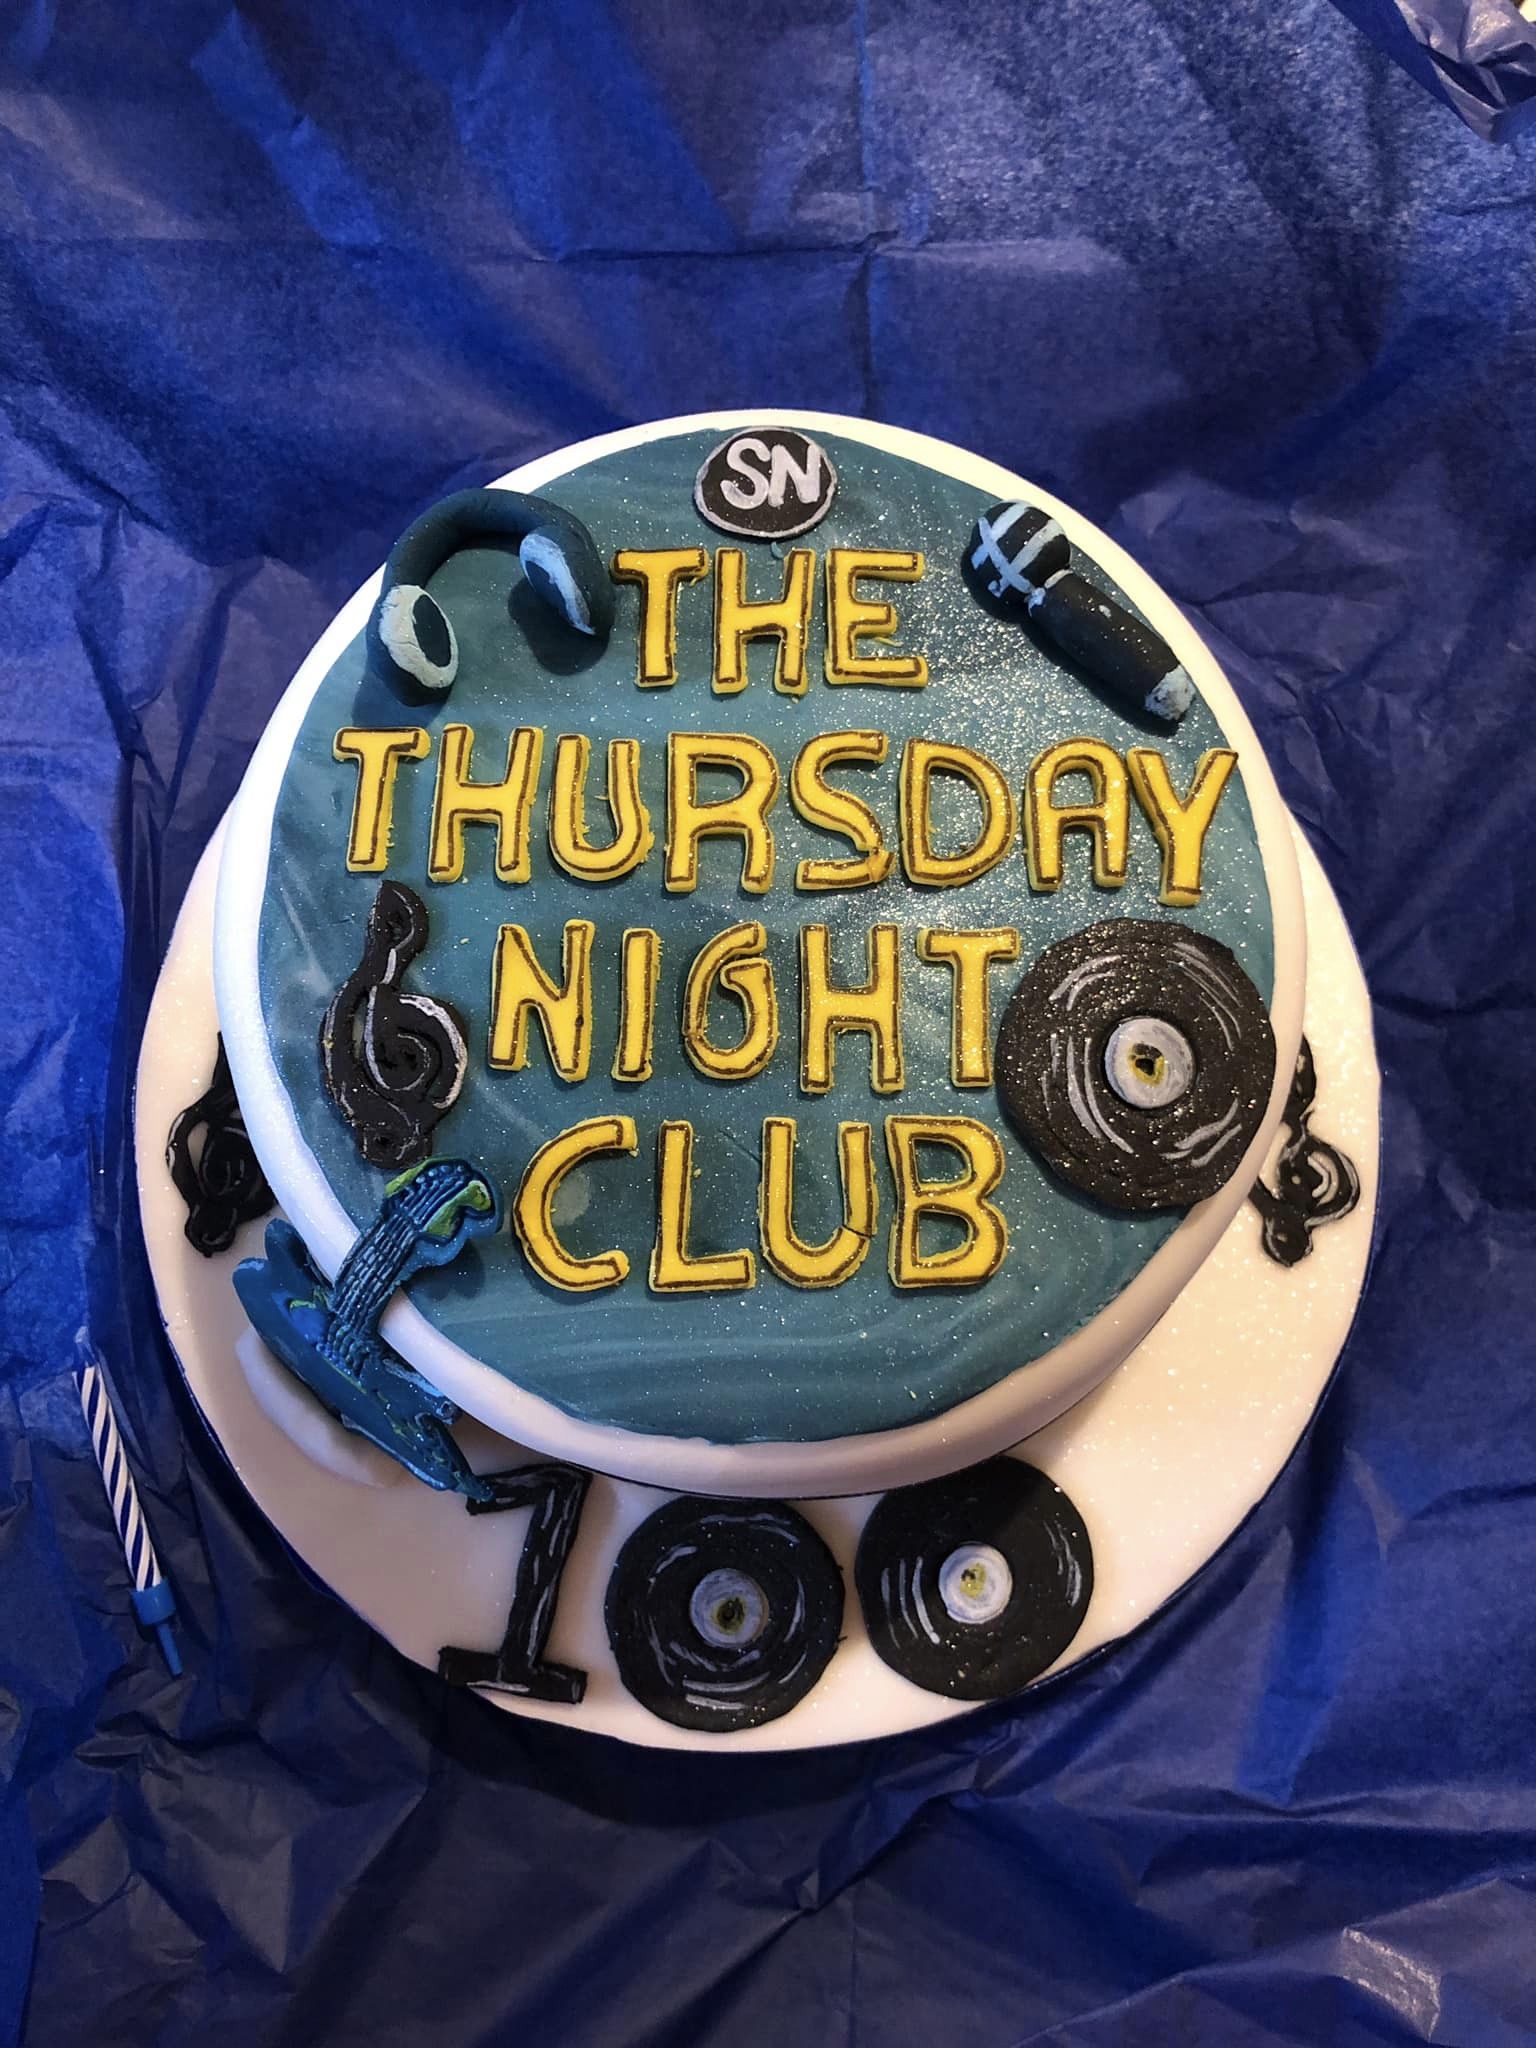 Tristan marks the 100th ‘Thursday Night Club’ on SNR – with cake!